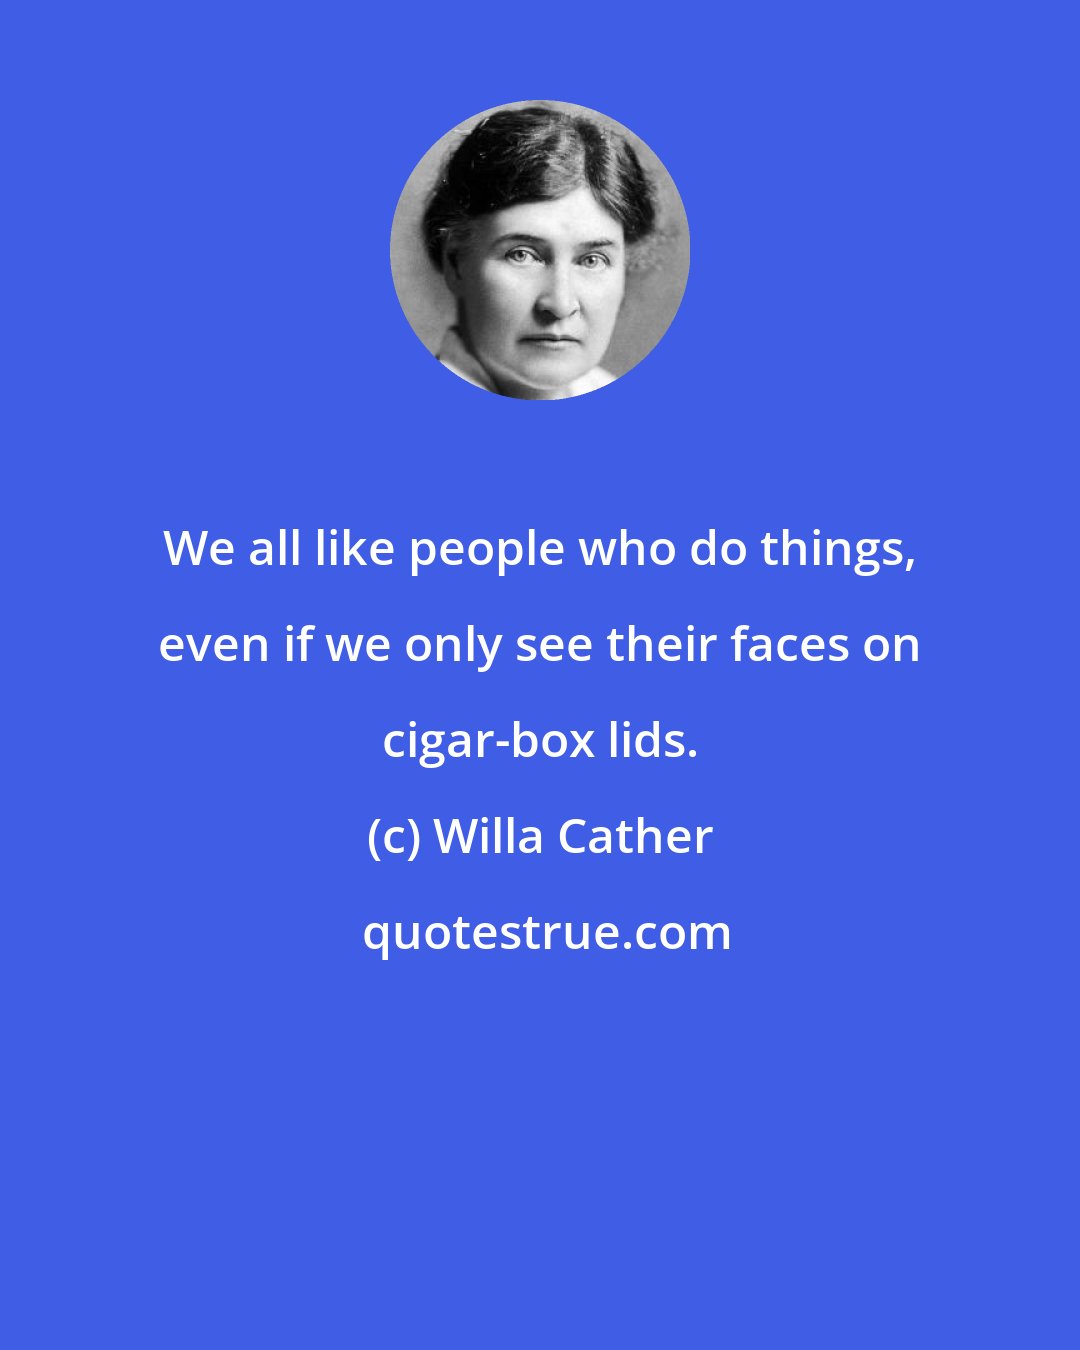 Willa Cather: We all like people who do things, even if we only see their faces on cigar-box lids.